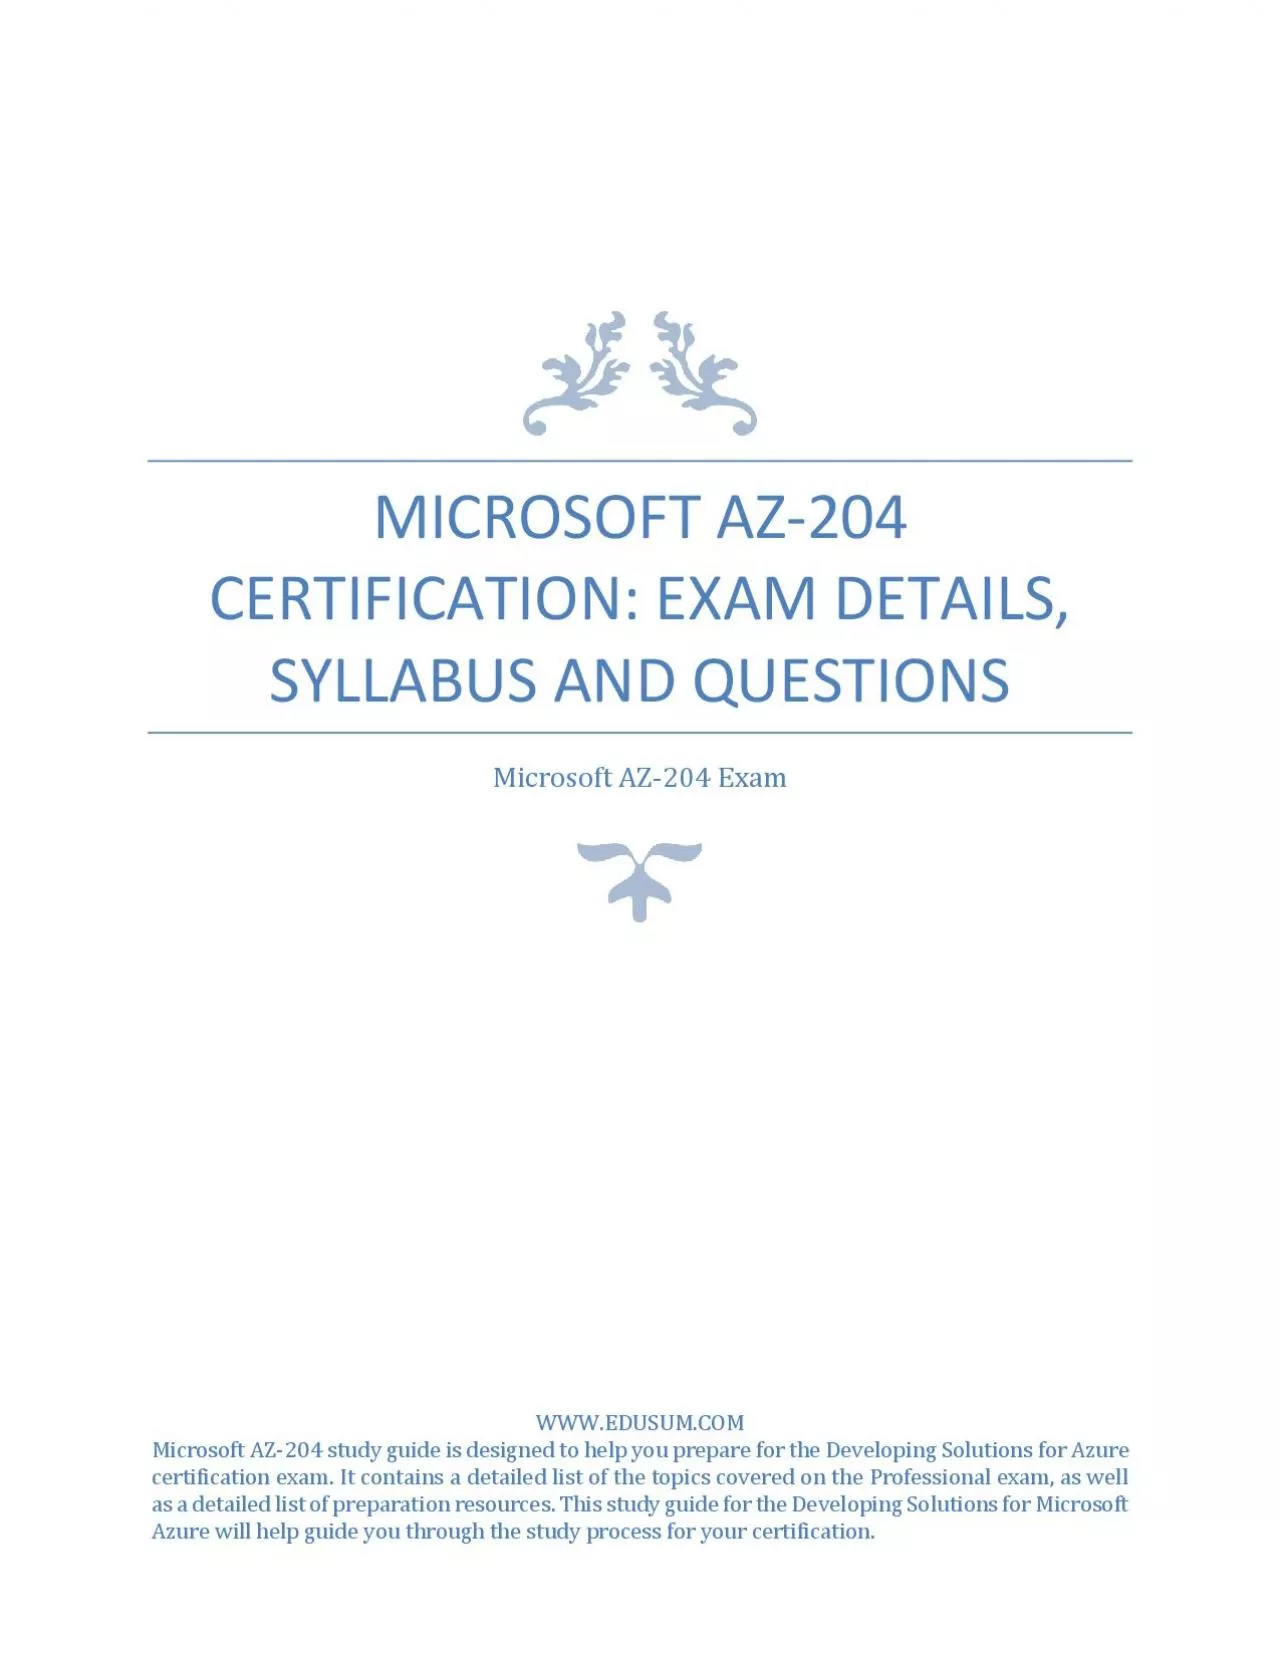 Microsoft AZ-204 Certification: Exam Details, Syllabus and Questions